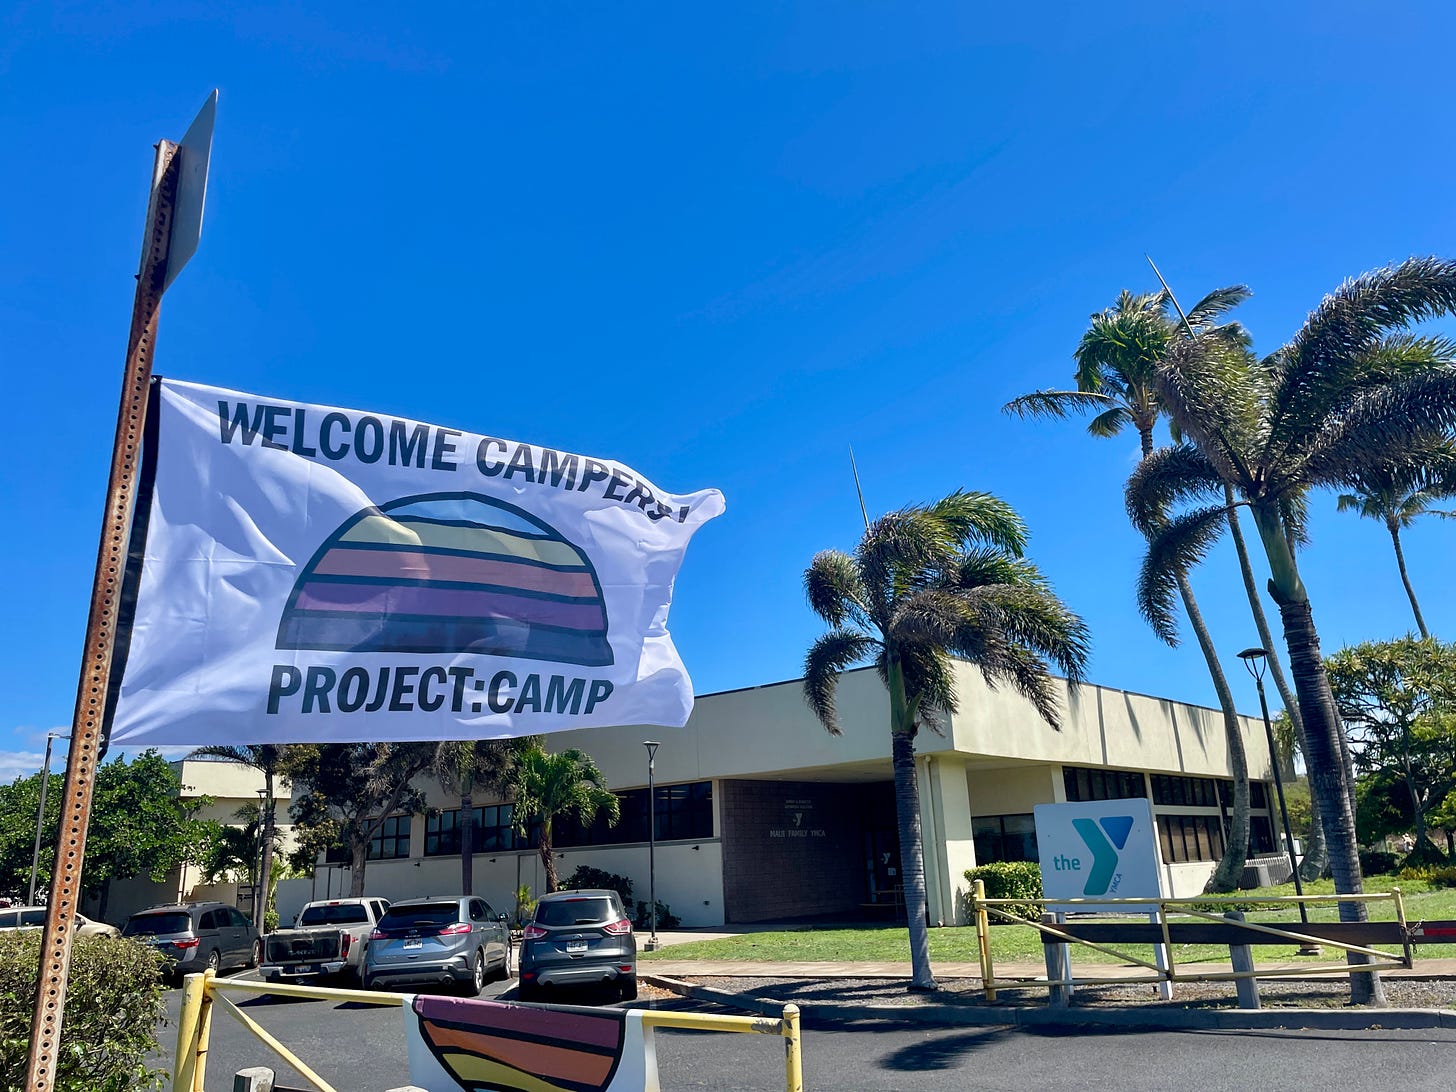 Project:Camp flag "Welcome Campers!" blowing in the wind on Maui